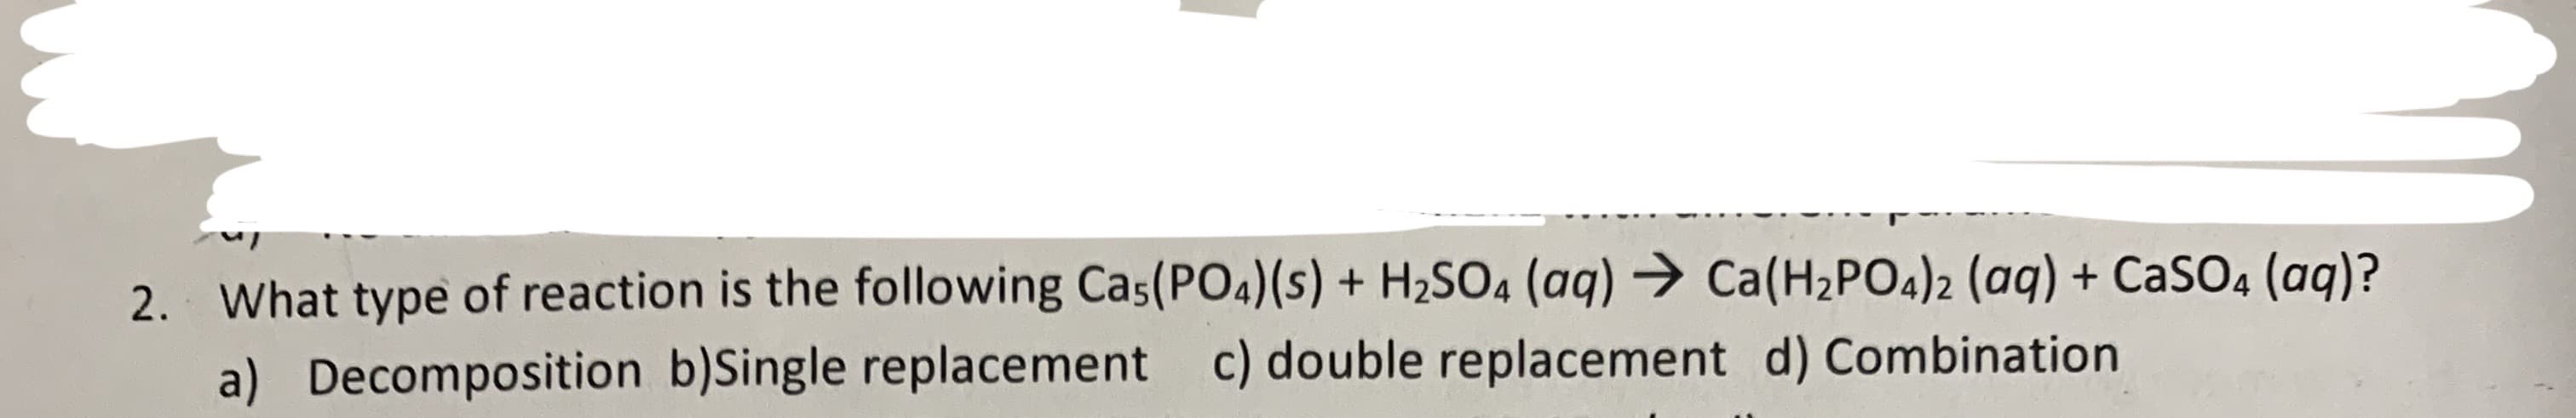 2. What type of reaction is the following Cas(PO4)(s) + H2SO4 (aq) Ca(H2PO4)2 (aq) + CaSO4 (aq)?
a) Decomposition b)Single replacement c) double replacement d) Combination
